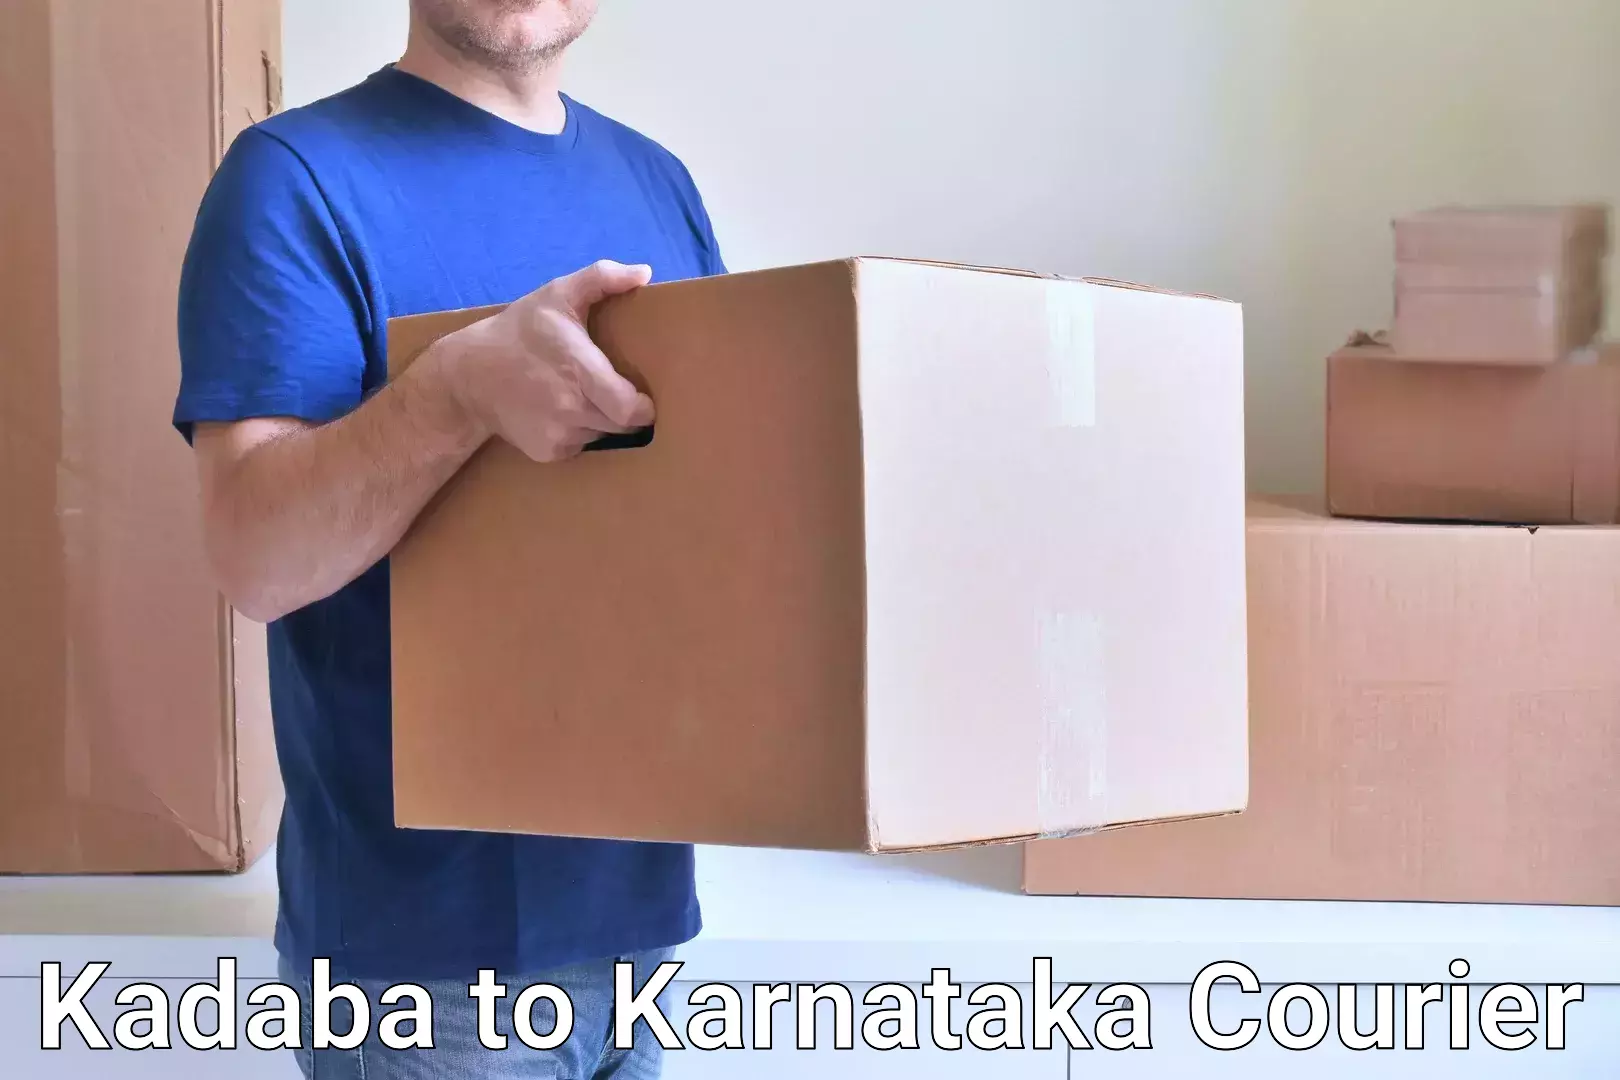 Courier dispatch services in Kadaba to Udupi